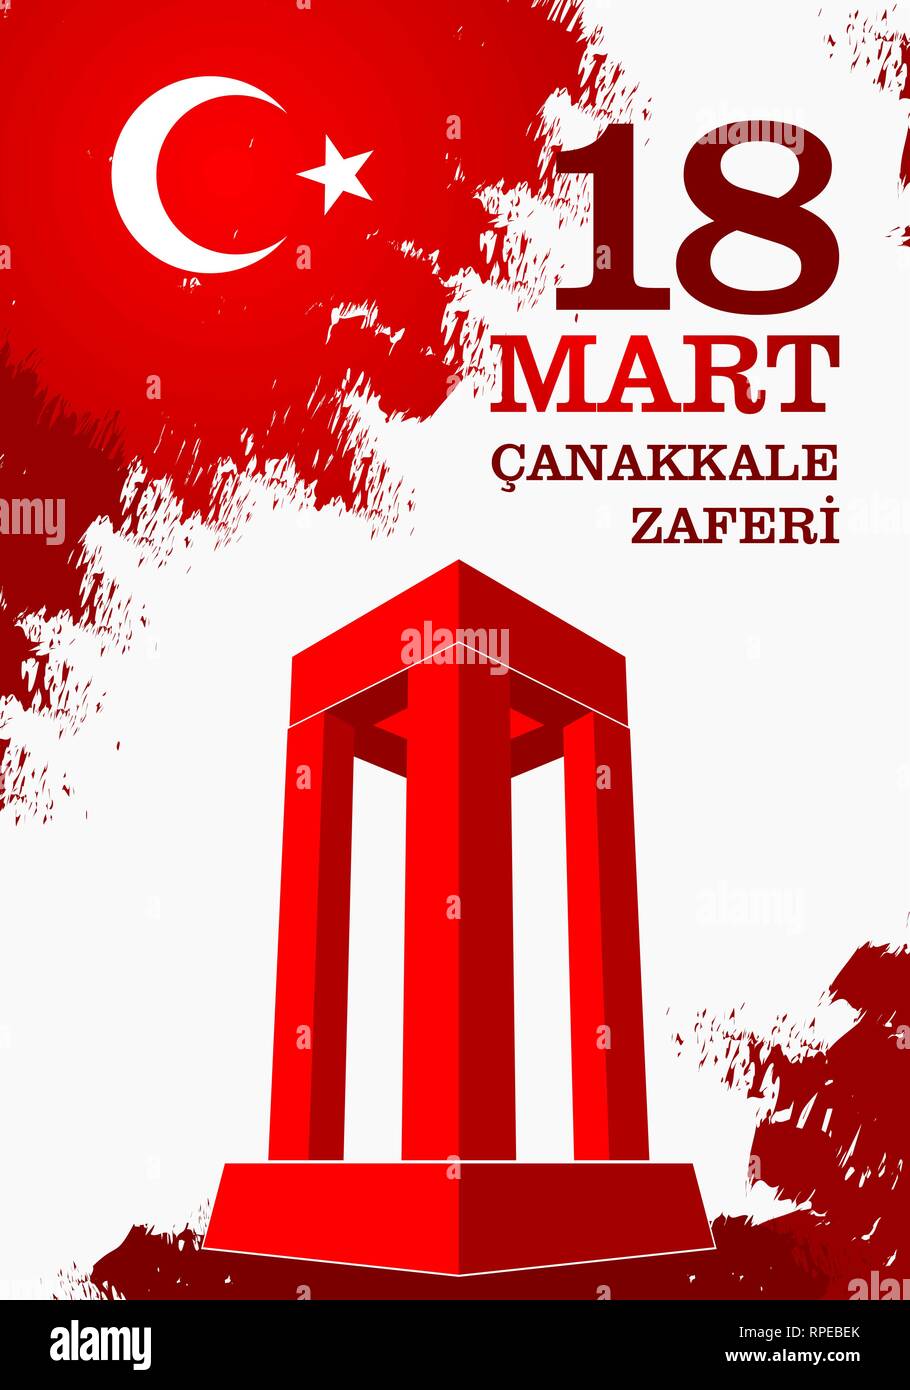 Canakkale zaferi 18 Mart. Translation: Turkish national holiday of March 18, 1915 the day the Ottomans victory Canakkale Victory. Stock Vector